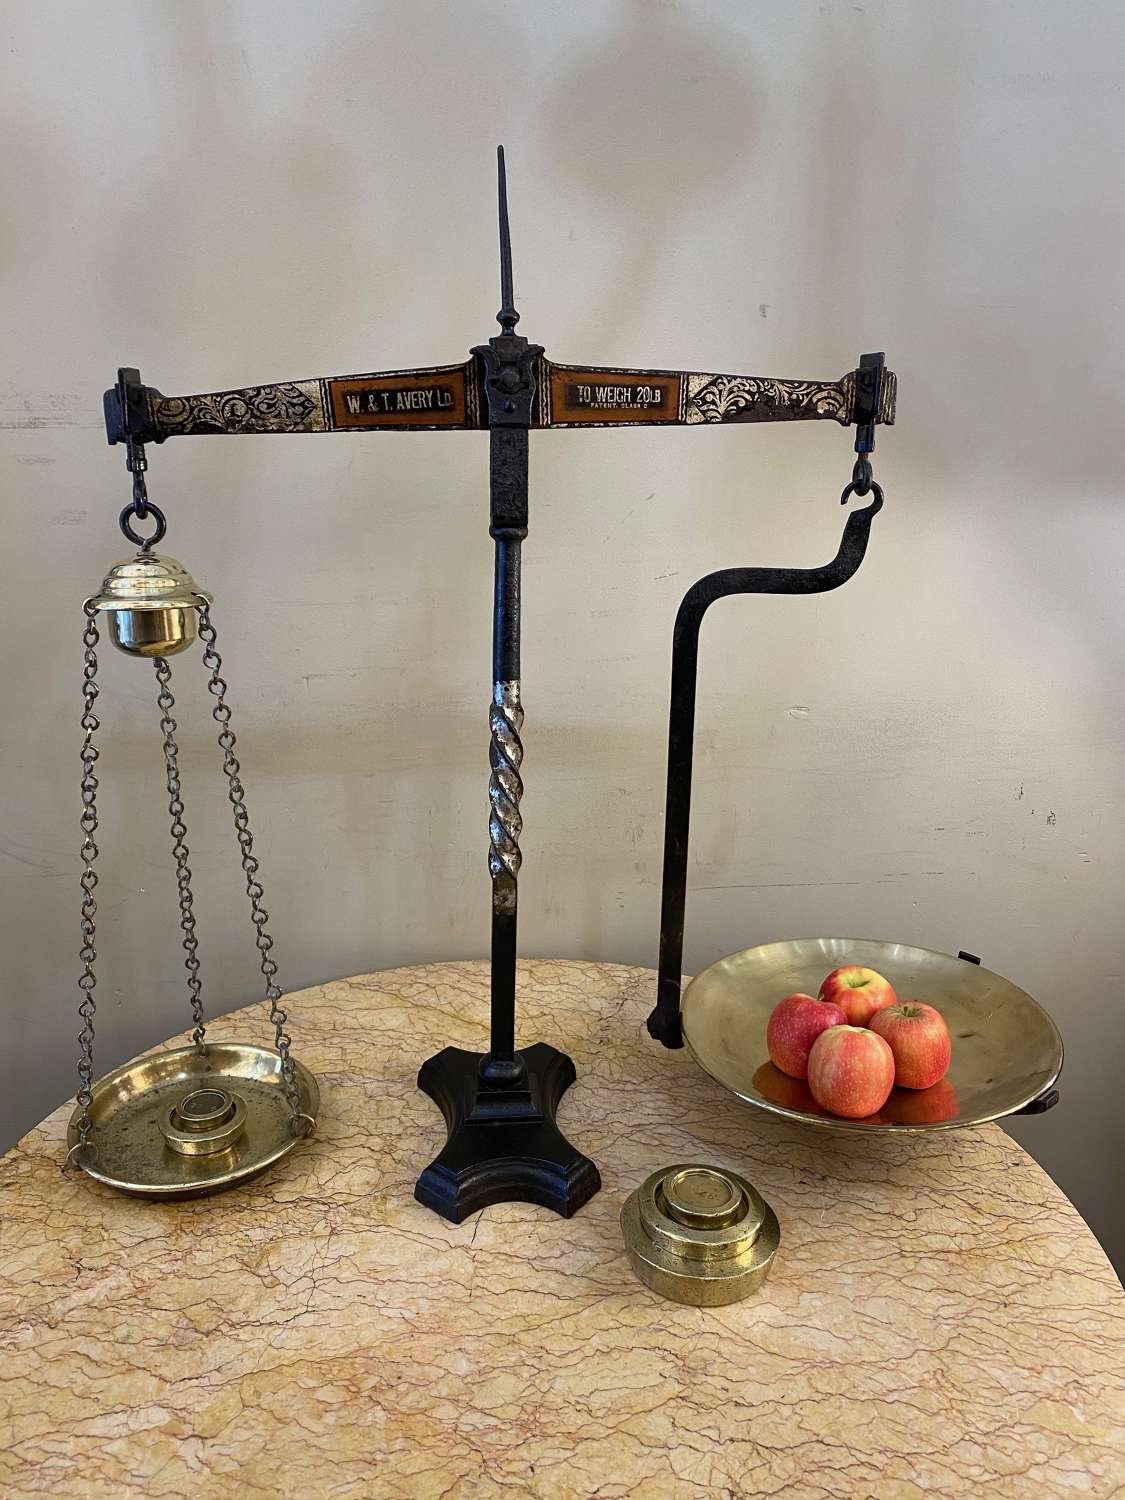 C1880 A Large Iron Set of Scales W & T Avery Ltd